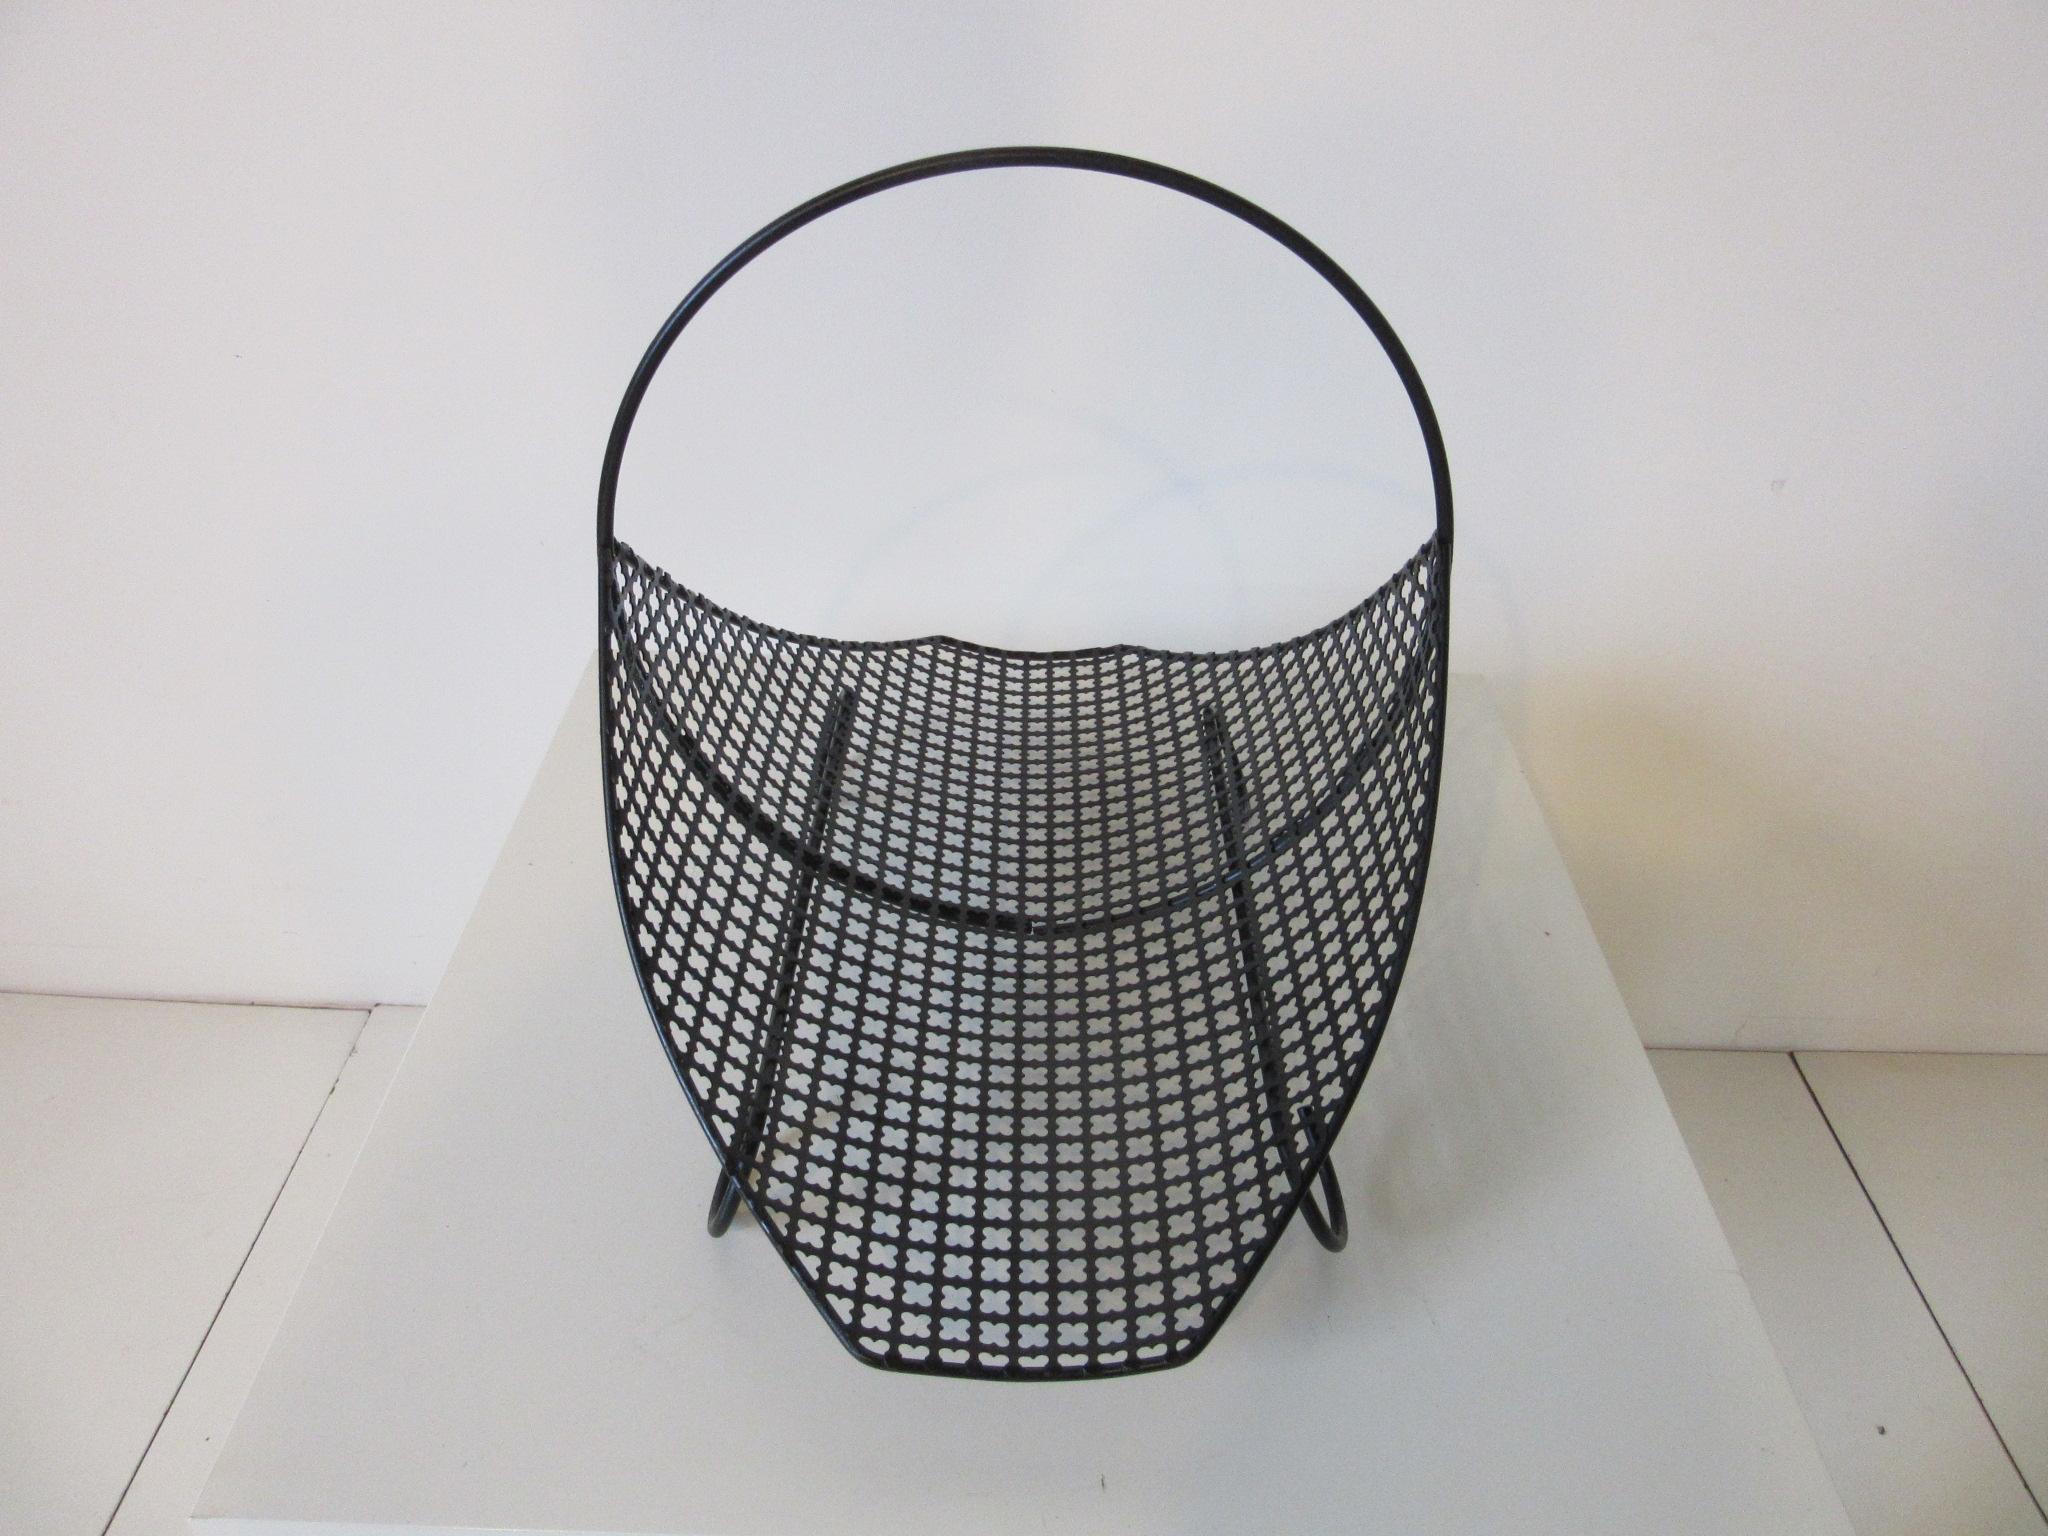 A satin black perforated metal magazine rack or log holder with circle handle and feet in the style of Mathieu Matégot and Artimeta.